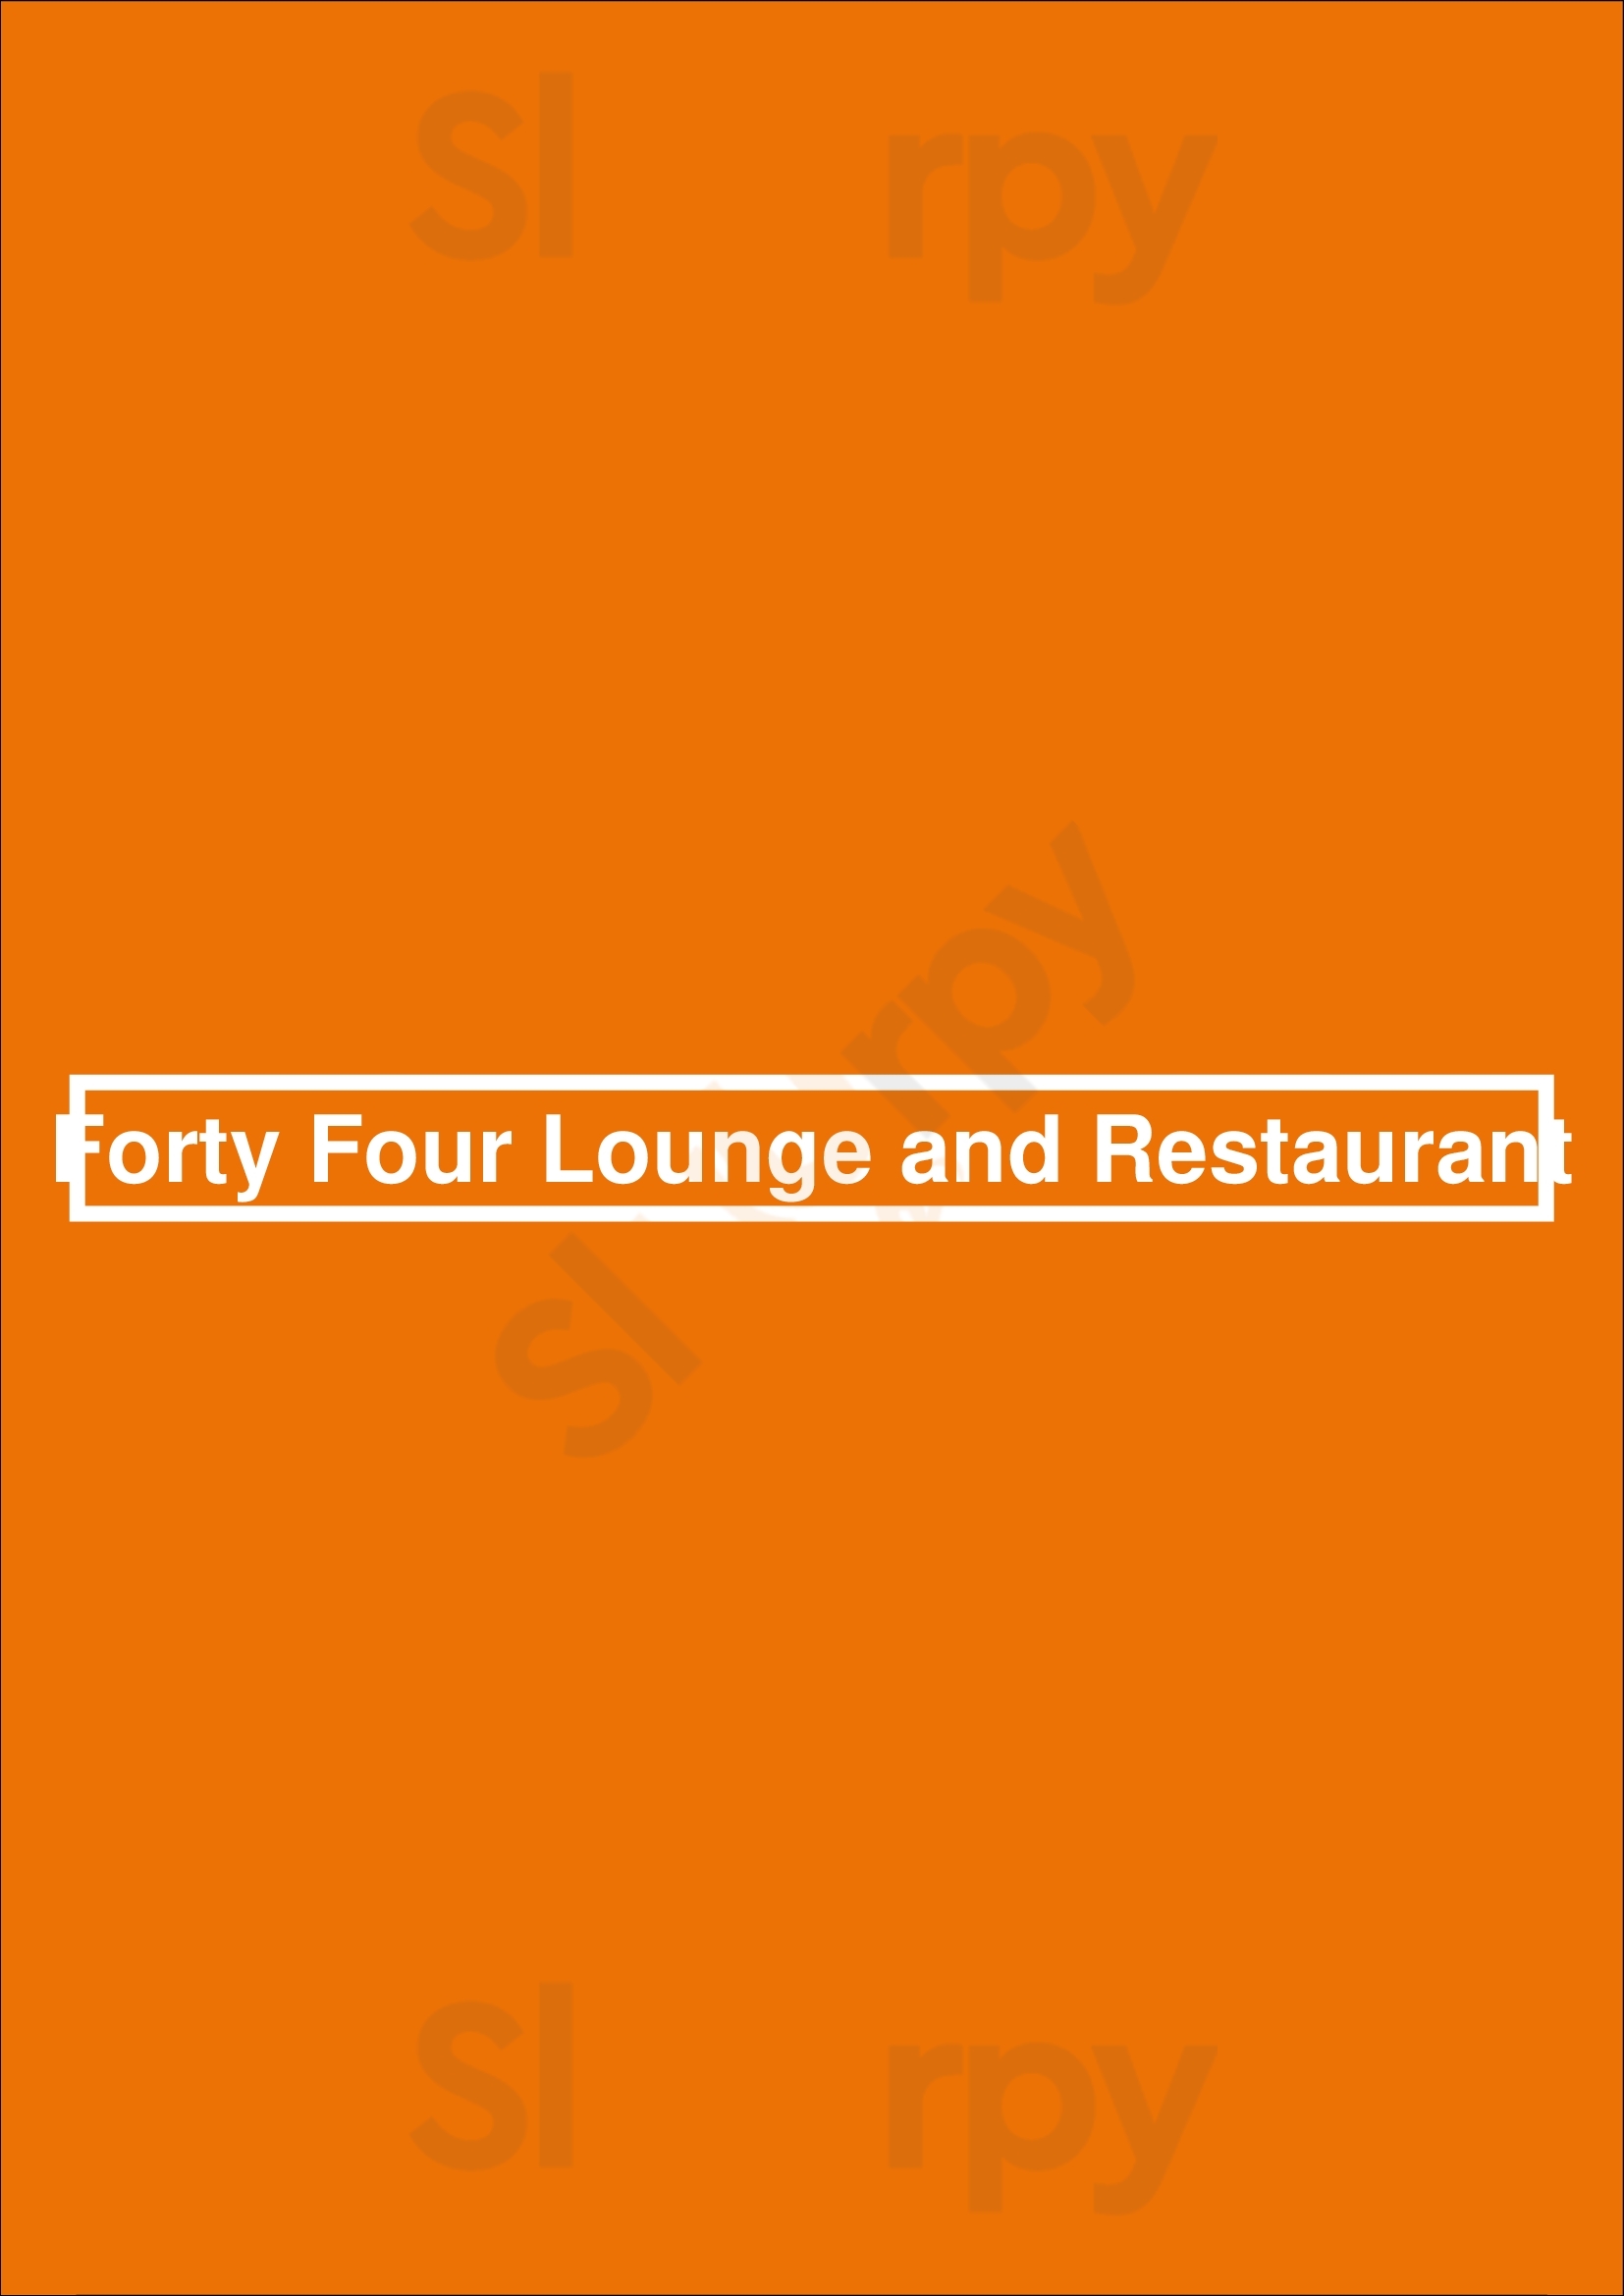 Forty Four Lounge And Restaurant New York City Menu - 1